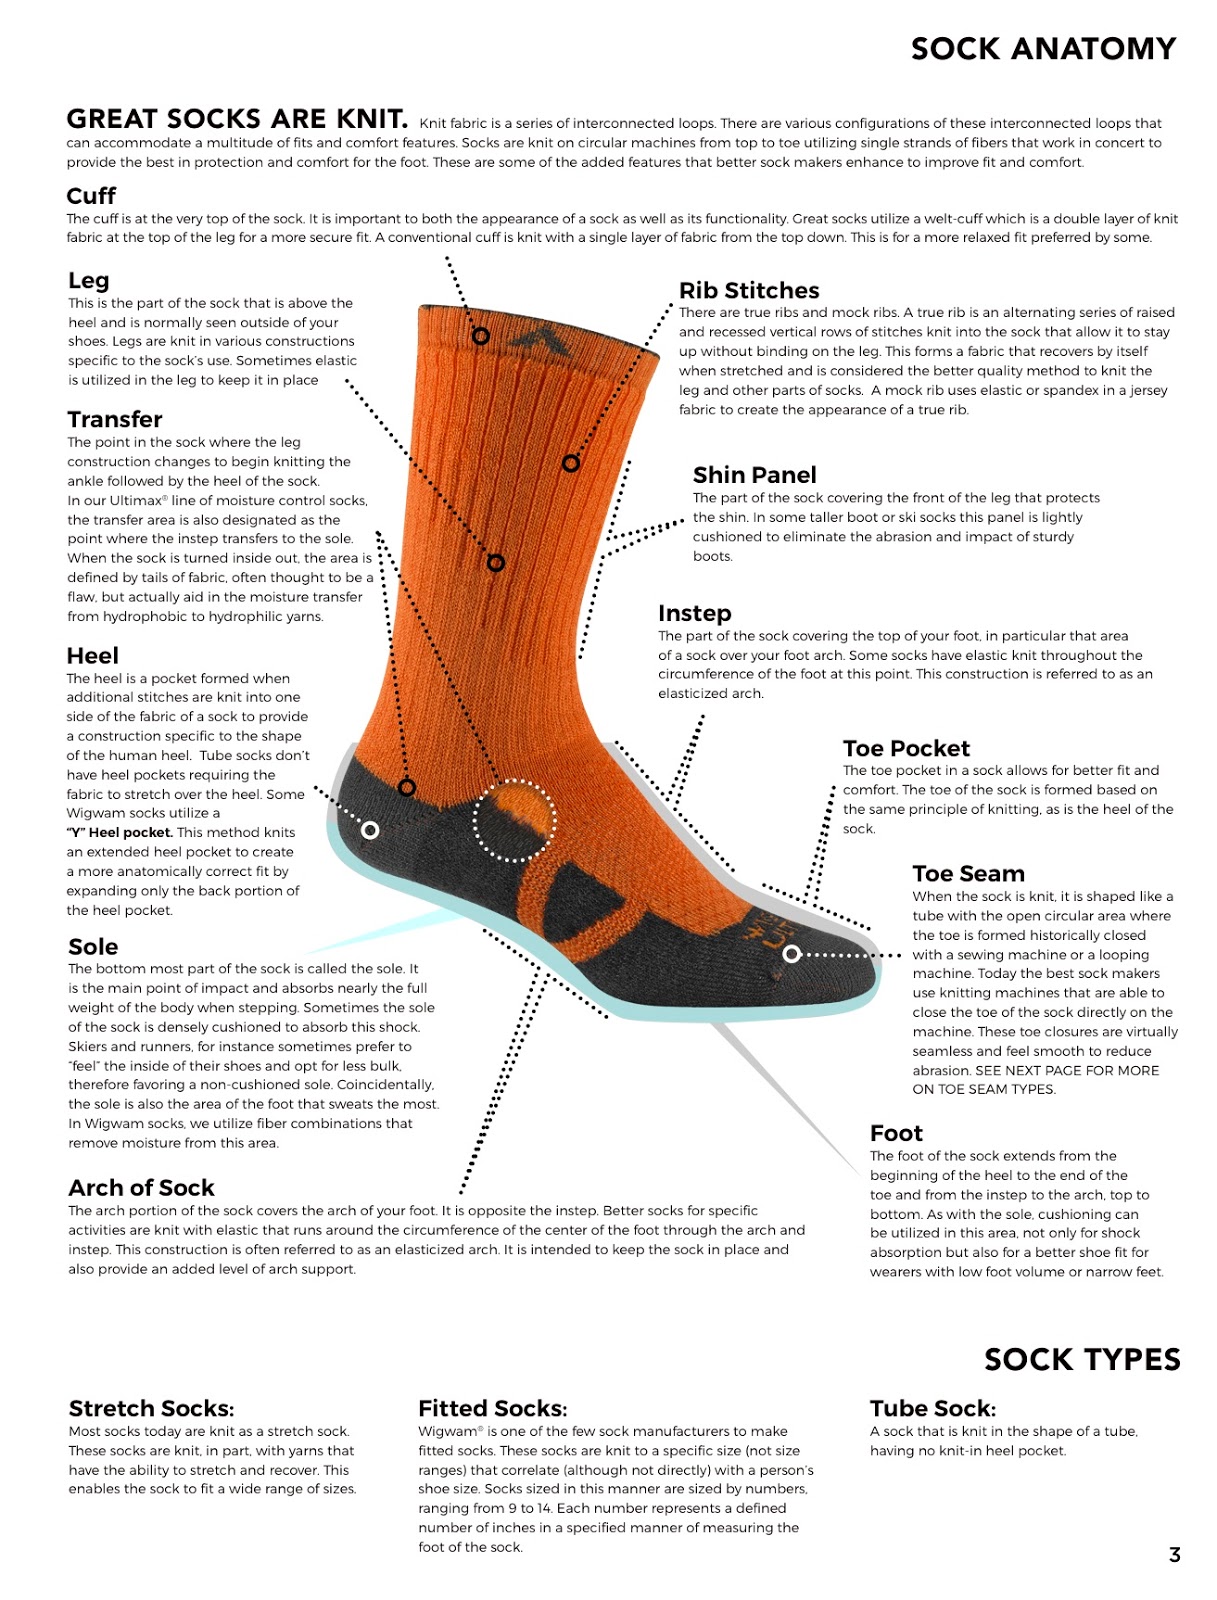 Are Socks Worn Inside Out? Unraveling the Great Sock Mystery – Venus Zine